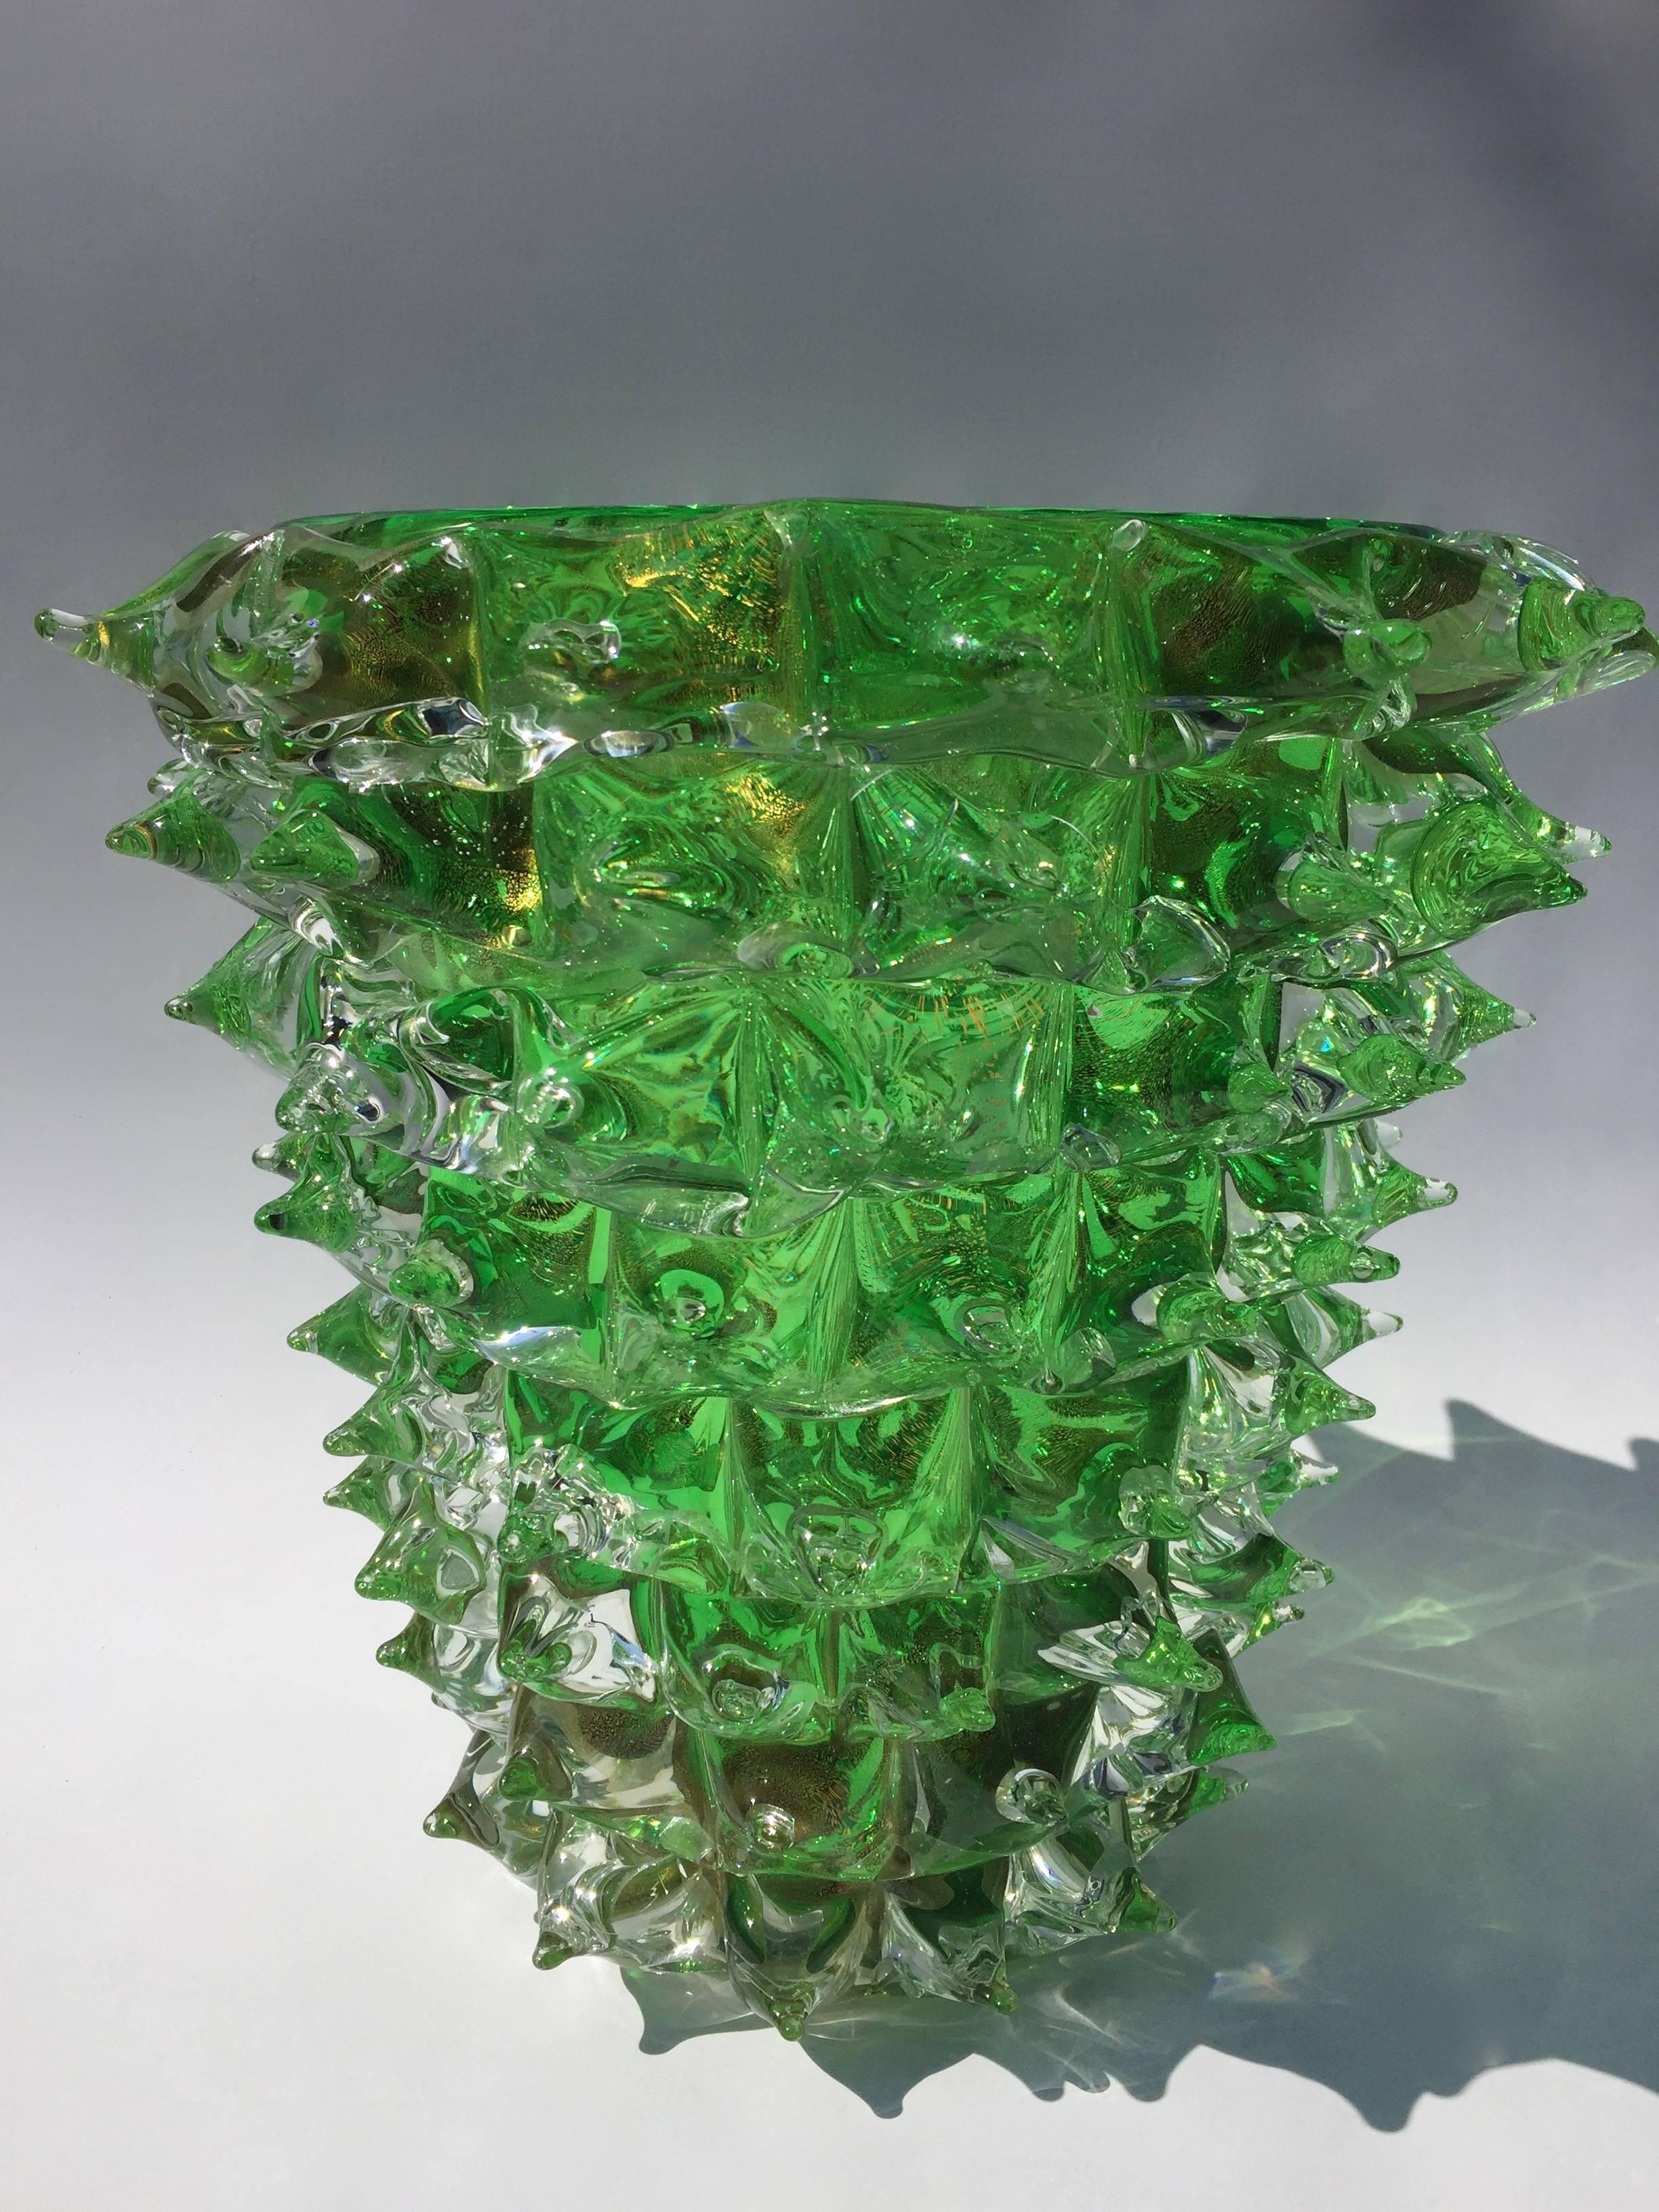 A pair of exquisite Murano vases by the renowned Murano artist Costantini. Green and clear glass pulled into peaks decorate the outside of the vase. Gold leaf is applied to the vase during creation to give a speckled and iridescent effect to the